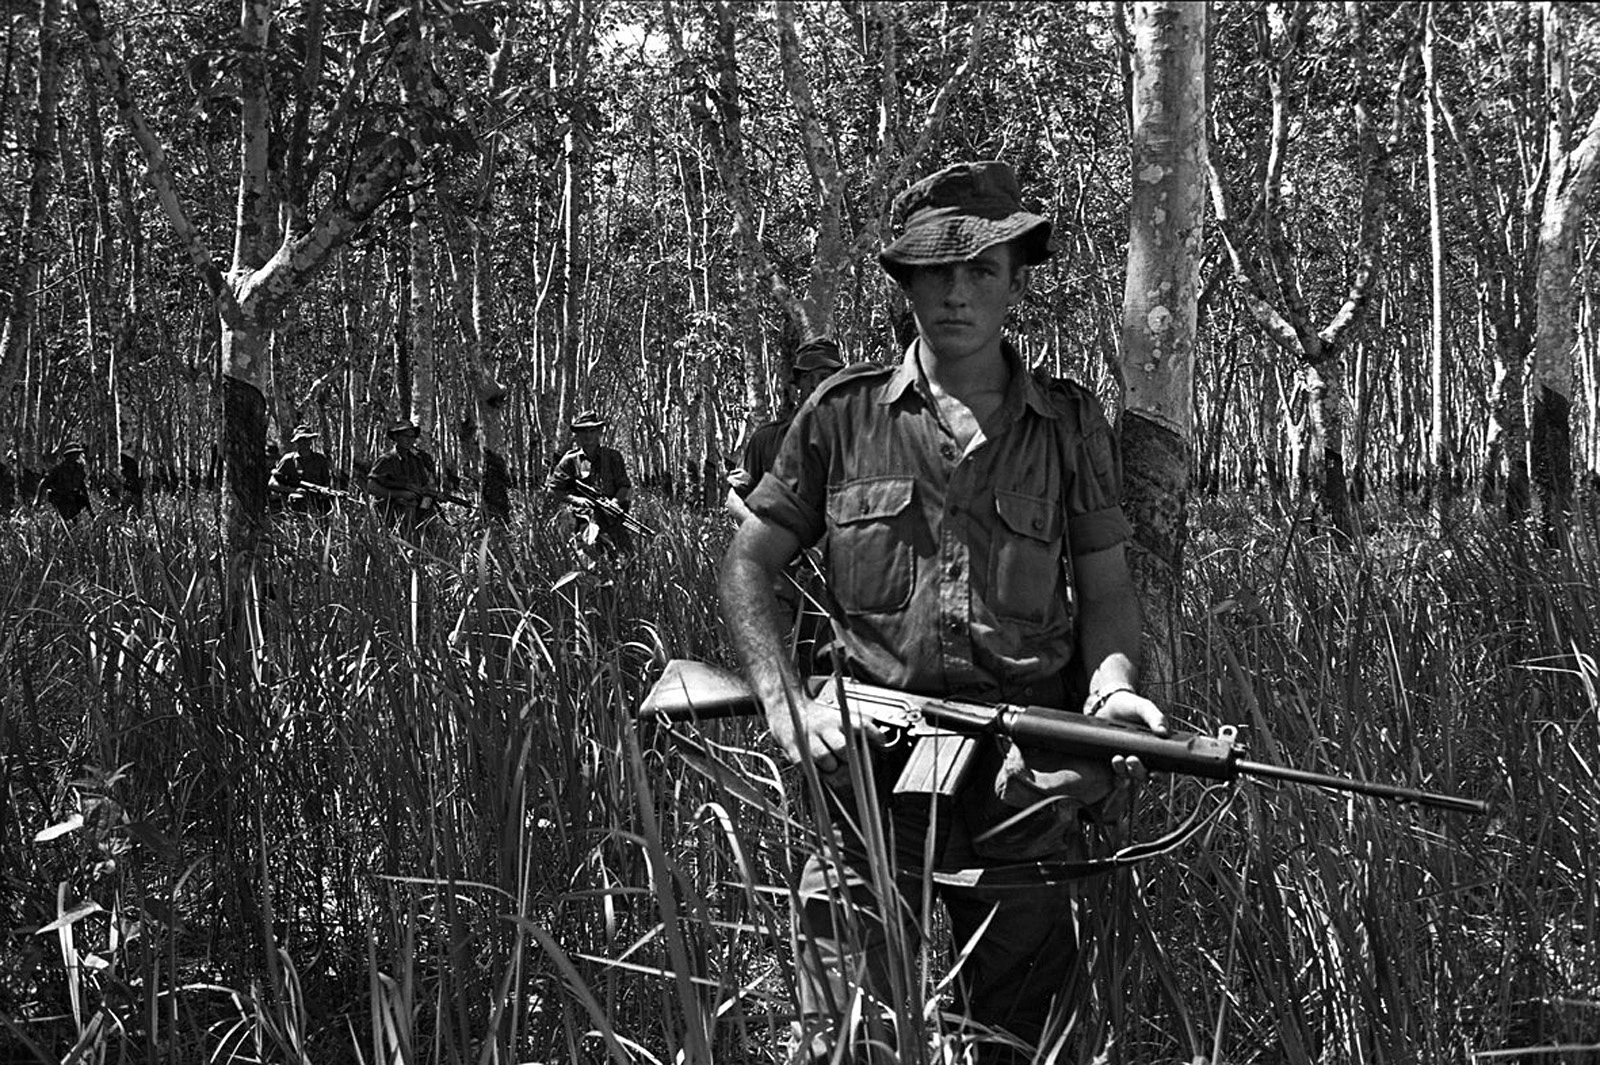 Vietnam War, Soldier Portrait, Combat Uniform, U.S. Military, Boonie Hat, Camouflage Pattern, M16 Rifle, Infantry Patrol, Forested Terrain, Mangrove Forest, Black and White Photo, Military Operation, Search Operation, Armed Forces, War Photography, Historical Military, Jungle Warfare, Tactical Gear, Soldier's Stance, Combat Environment